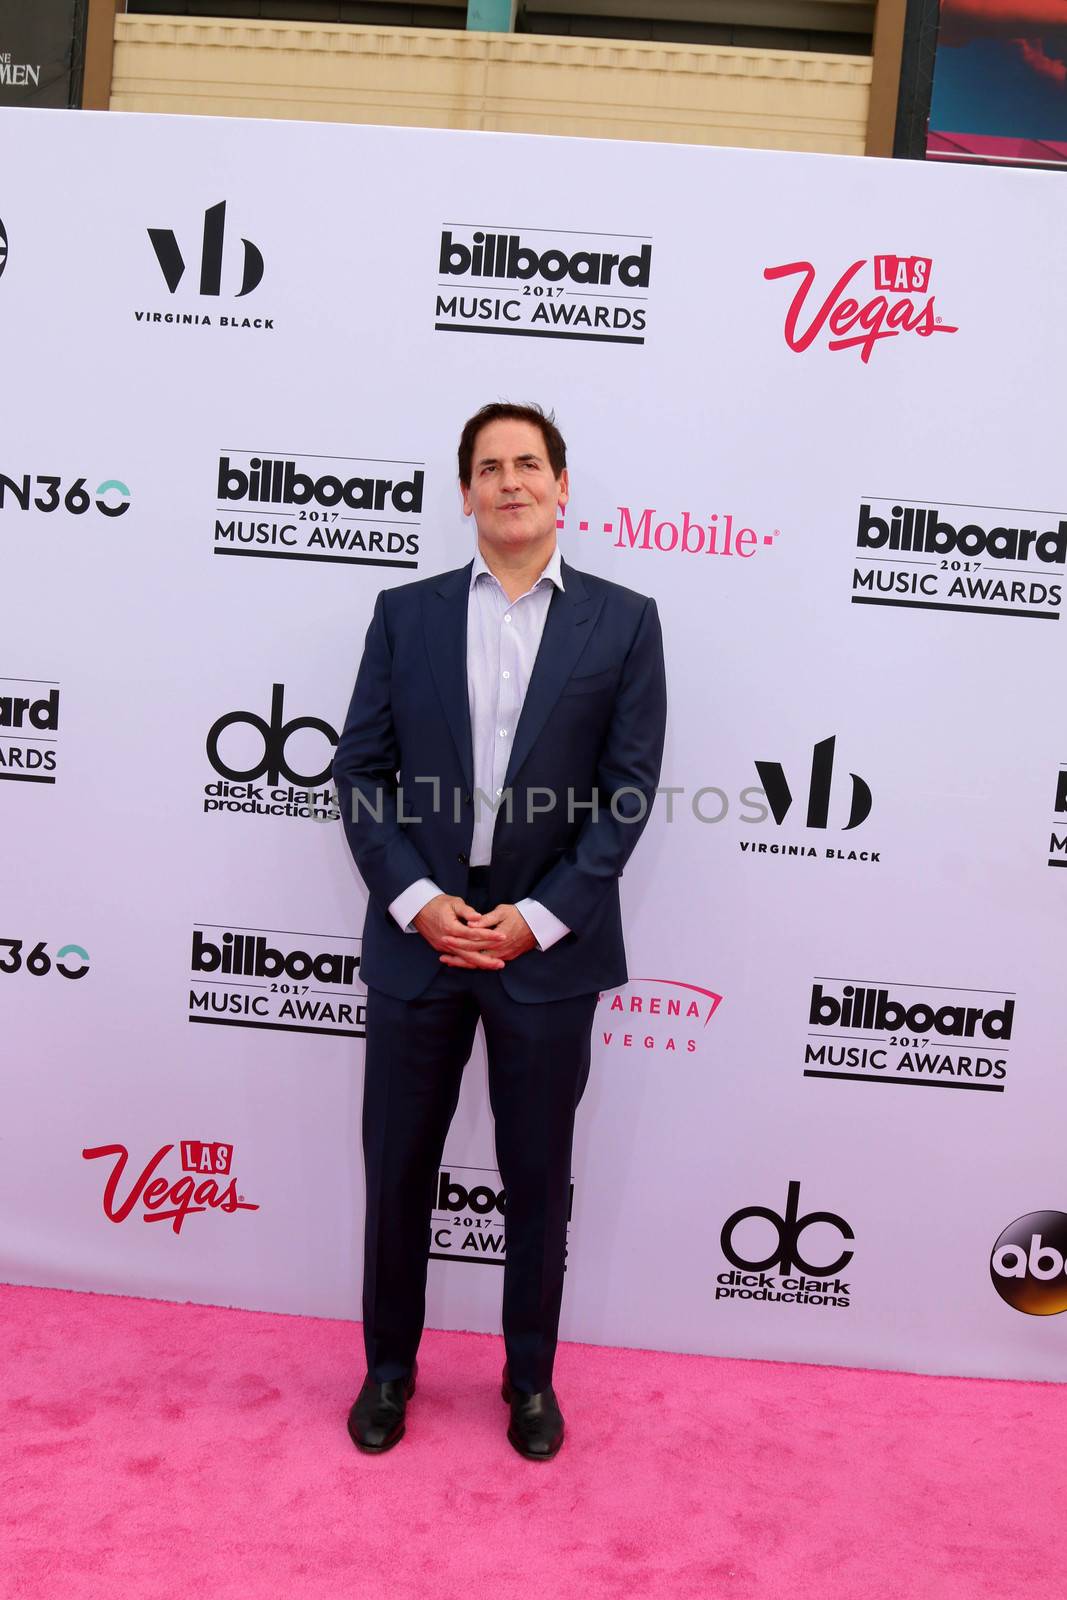 Mark Cuban
at the 2017 Billboard Awards Arrivals, T-Mobile Arena, Las Vegas, NV 05-21-17/ImageCollect by ImageCollect